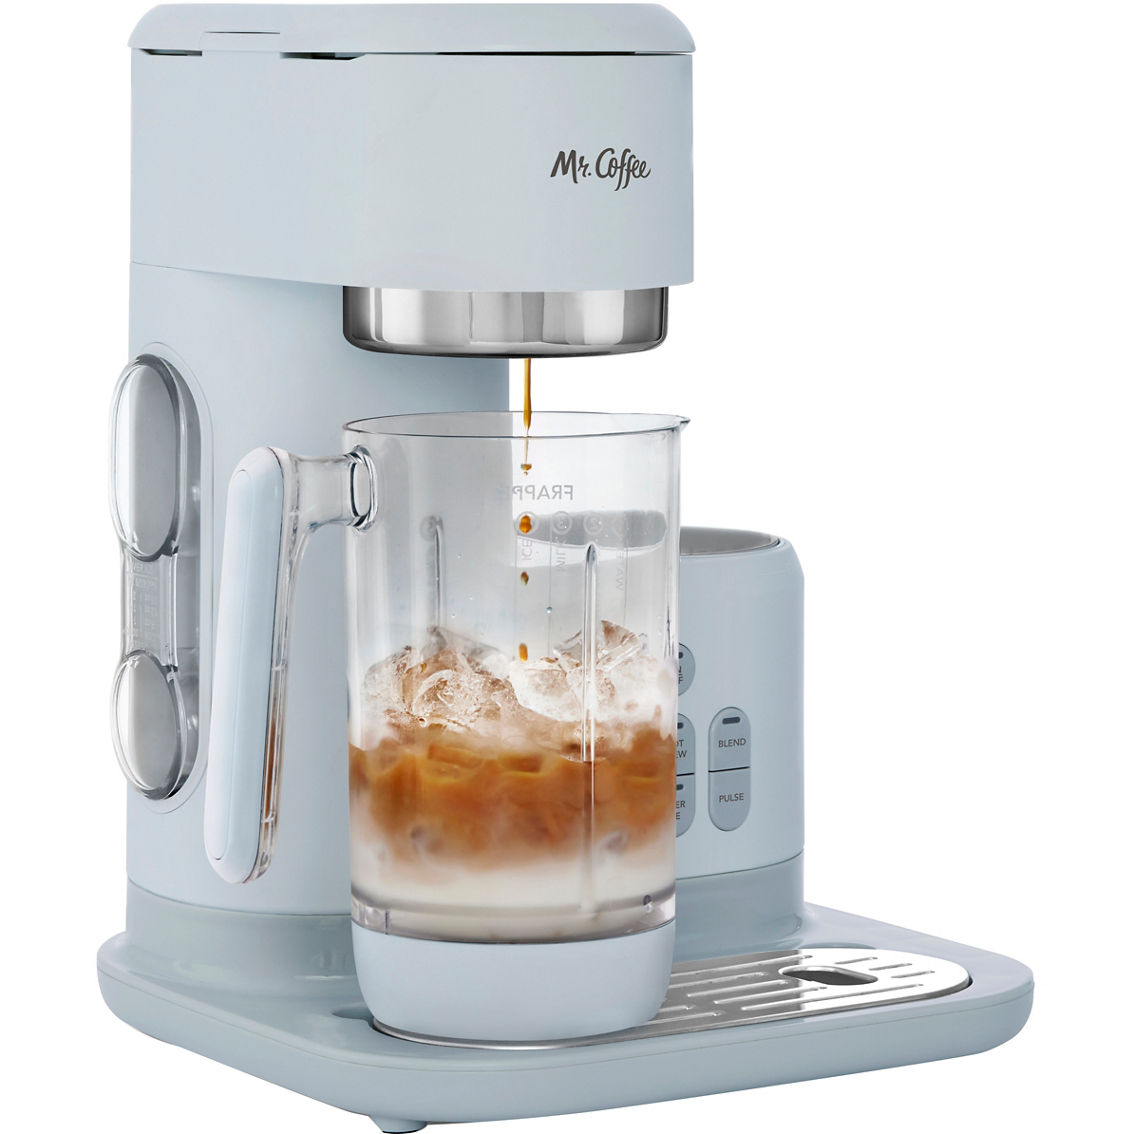 Mr. Coffee Frappe Hot and Cold Single Serve Coffee Maker - Image 3 of 7